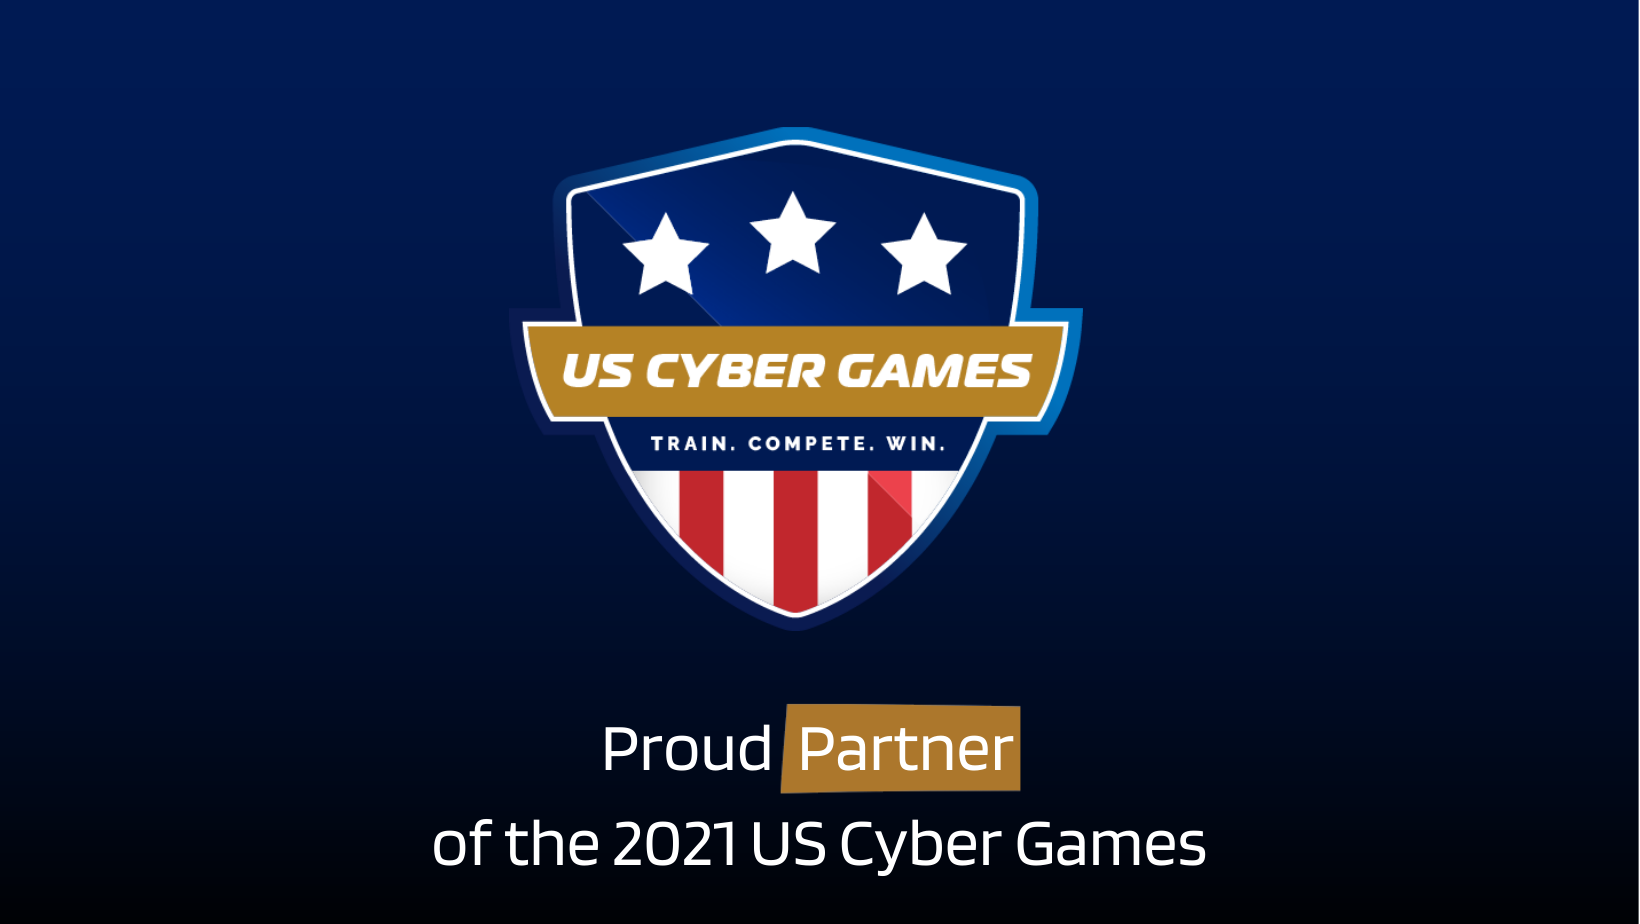 Proud Partner of the US Cyber Game